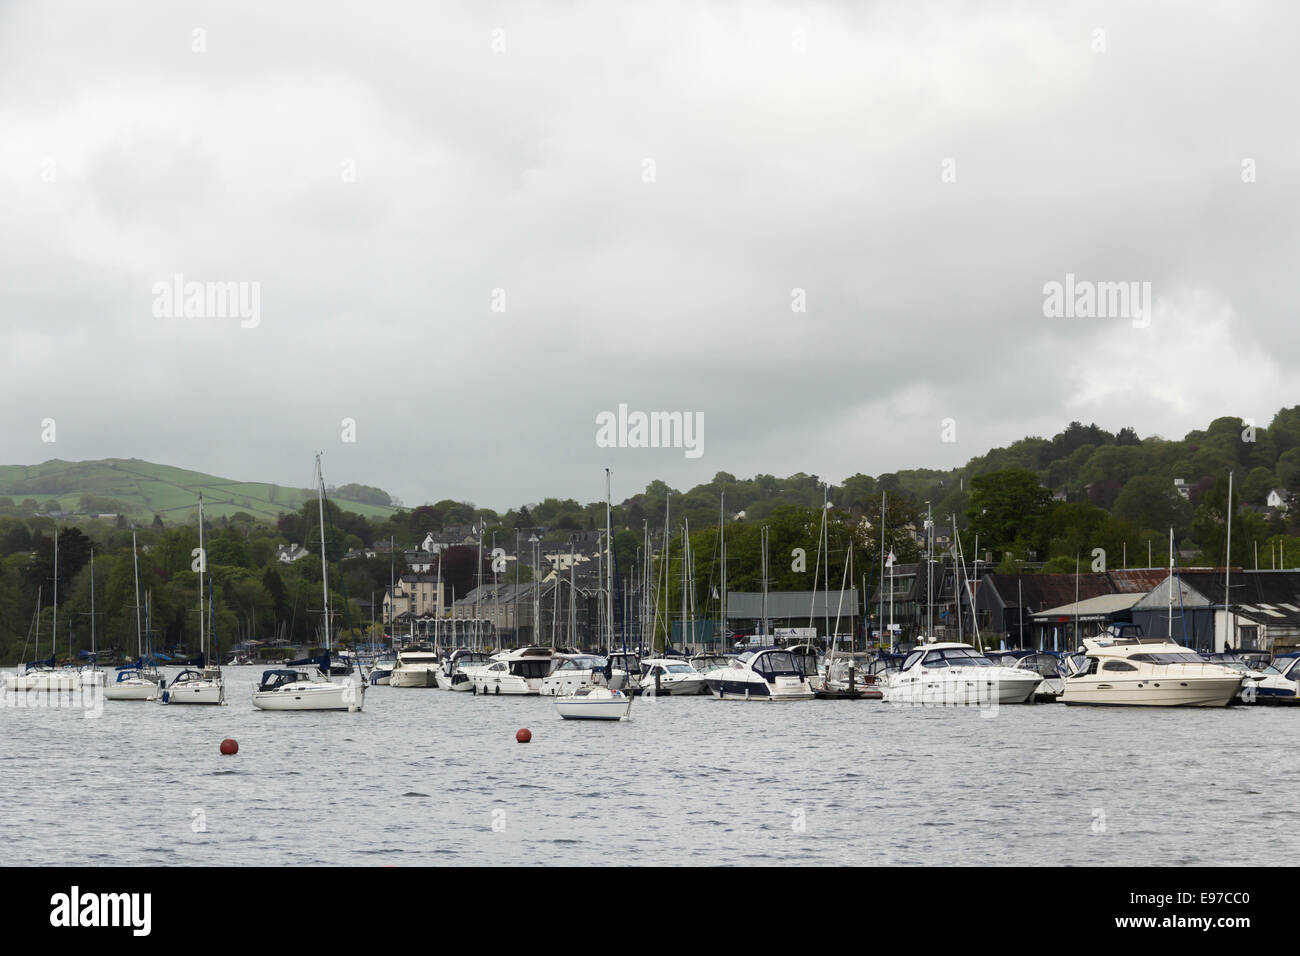 Luxury yachts and motor boats moored at Bowness Bay marina, Bowness-on-Windermere on Lake Windermere in the English Lake District. Stock Photo